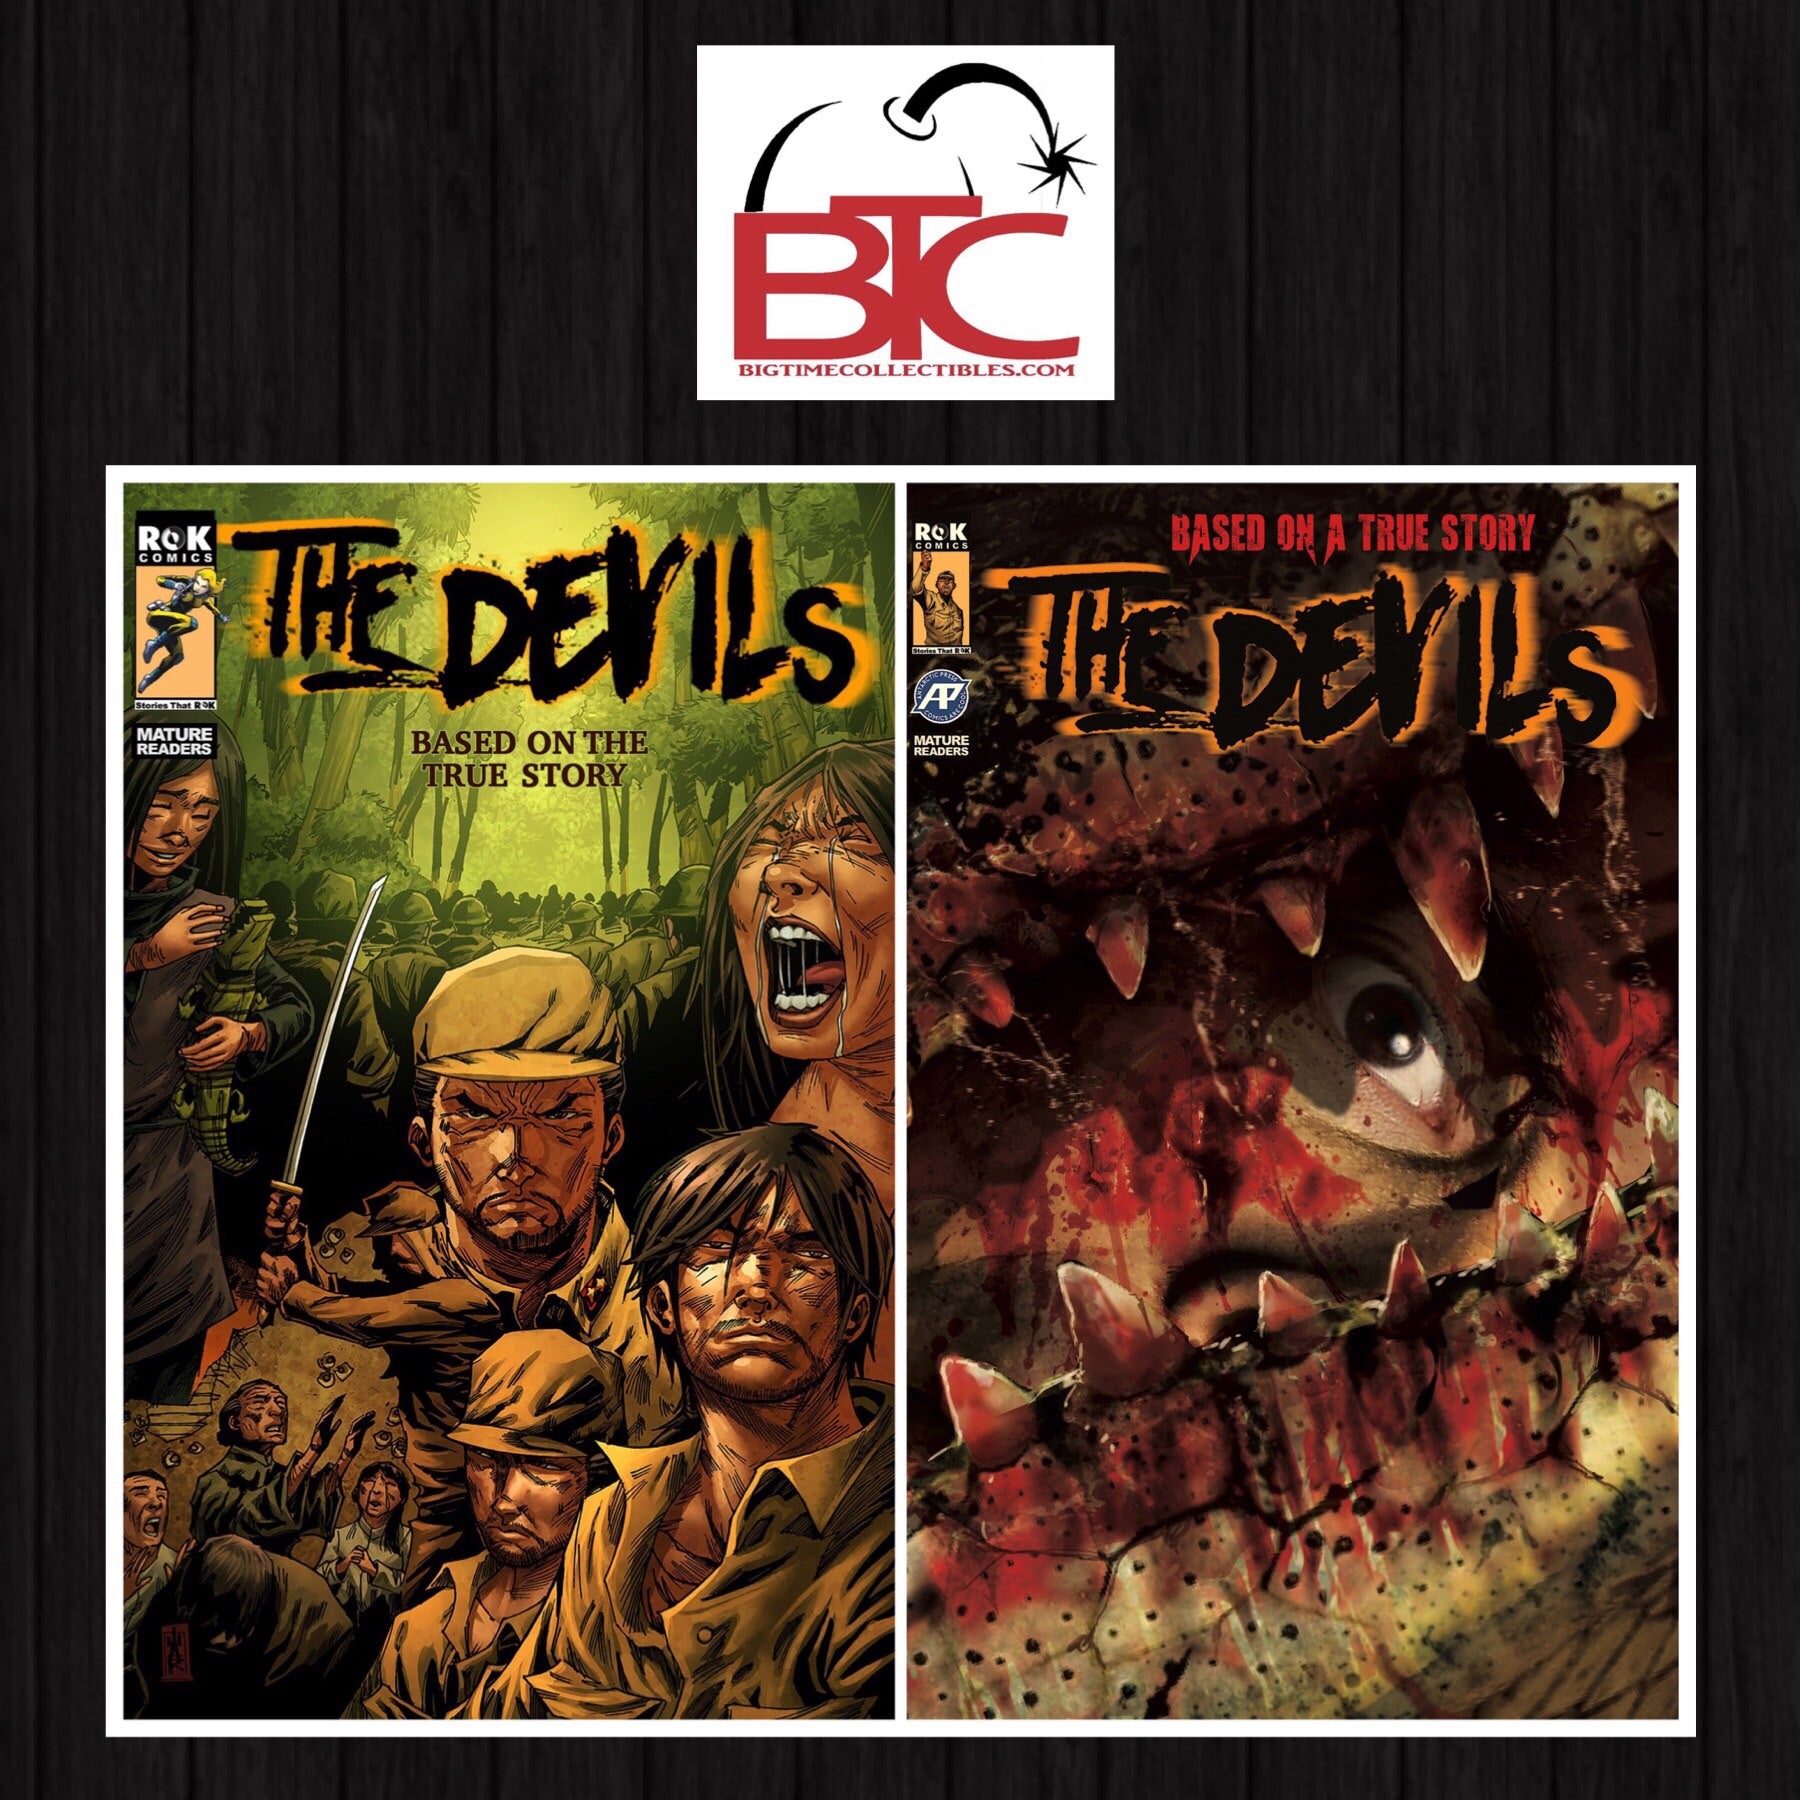 THE DEVILS #1 & #2 BTC EXCLUSIVE LIMITED TO 300 COPIES PRINT RUN WITH NUMBERED COA (NM RAW COPY)